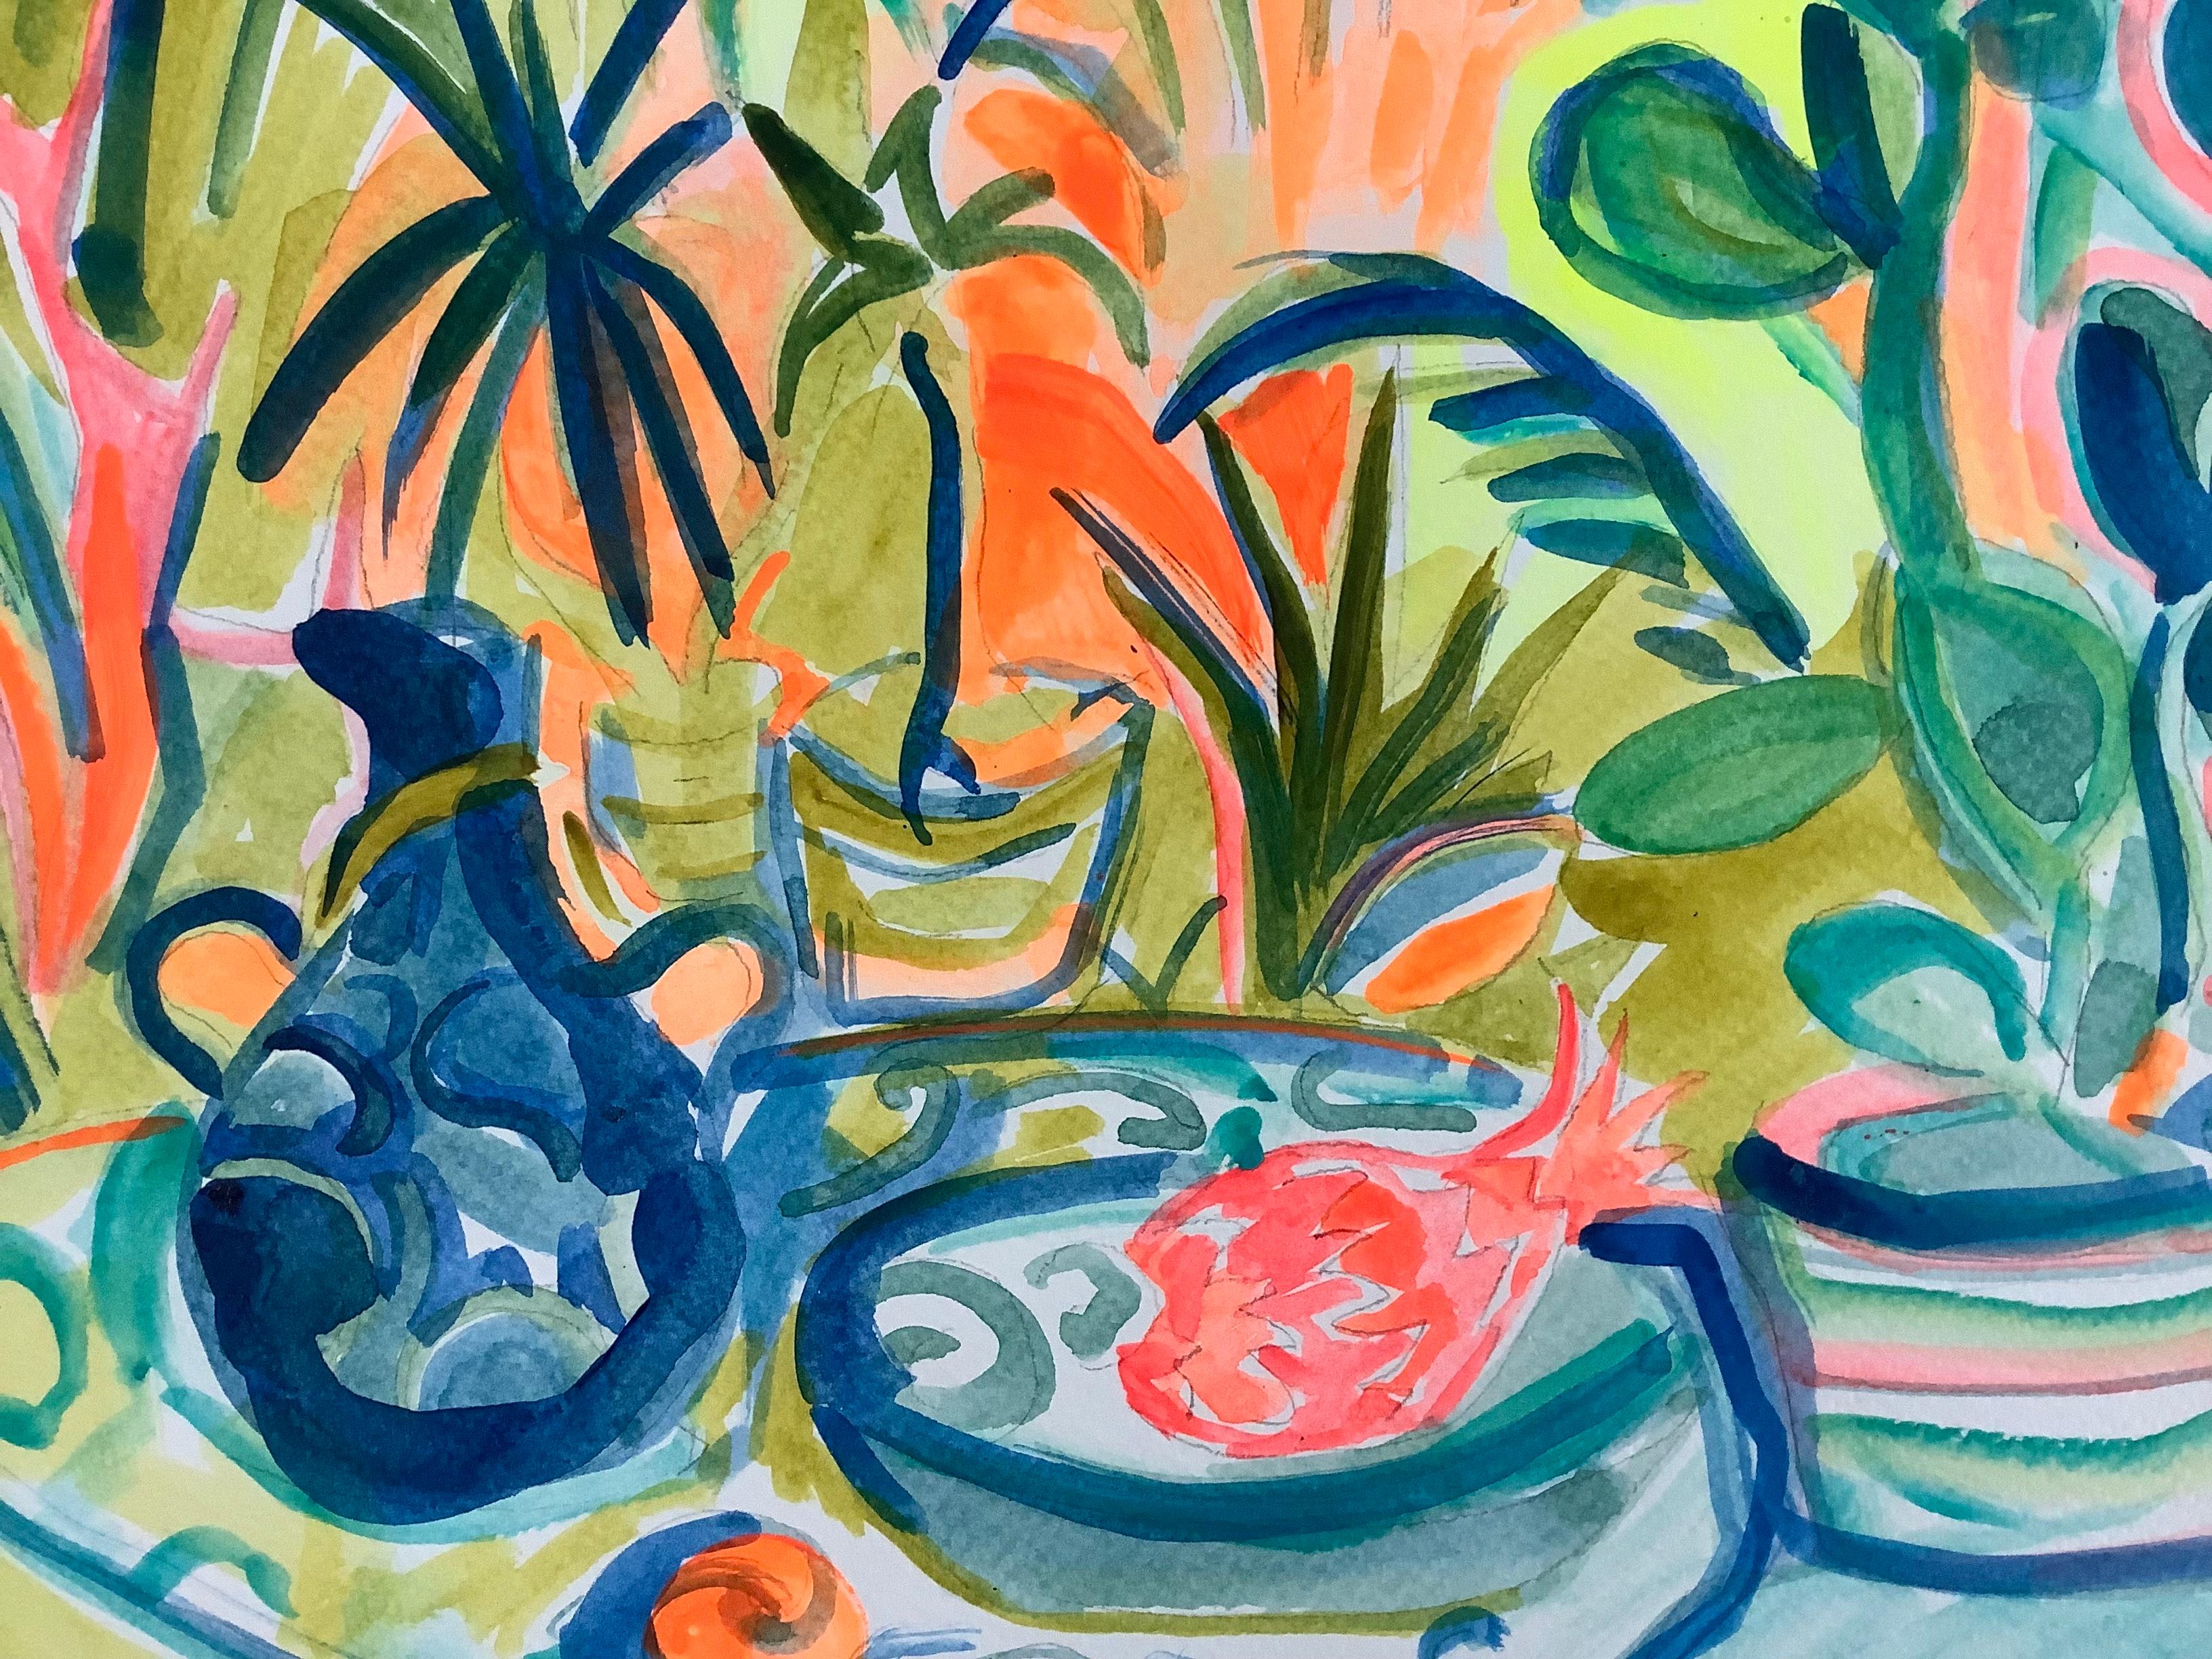 Pots in the Jungle, Acrylic on watercolour paper, 29x42cm, 2021 - Painting by Emi Avora